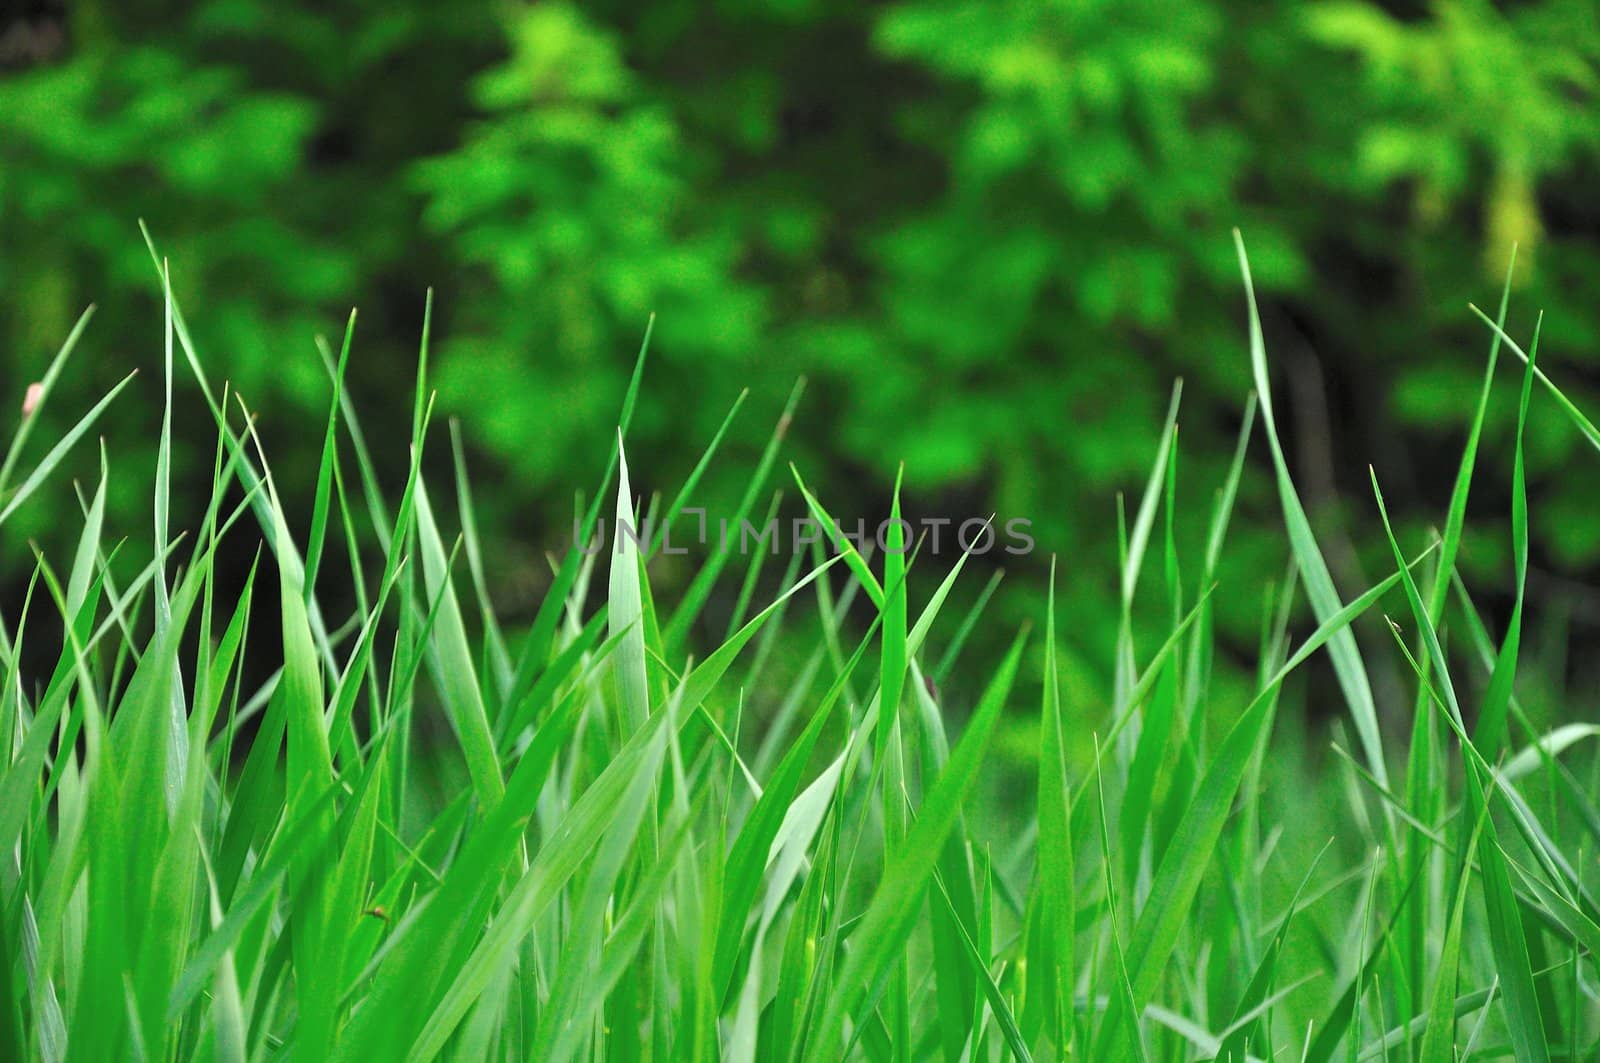 Green Grass and Trees Background by gilmourbto2001